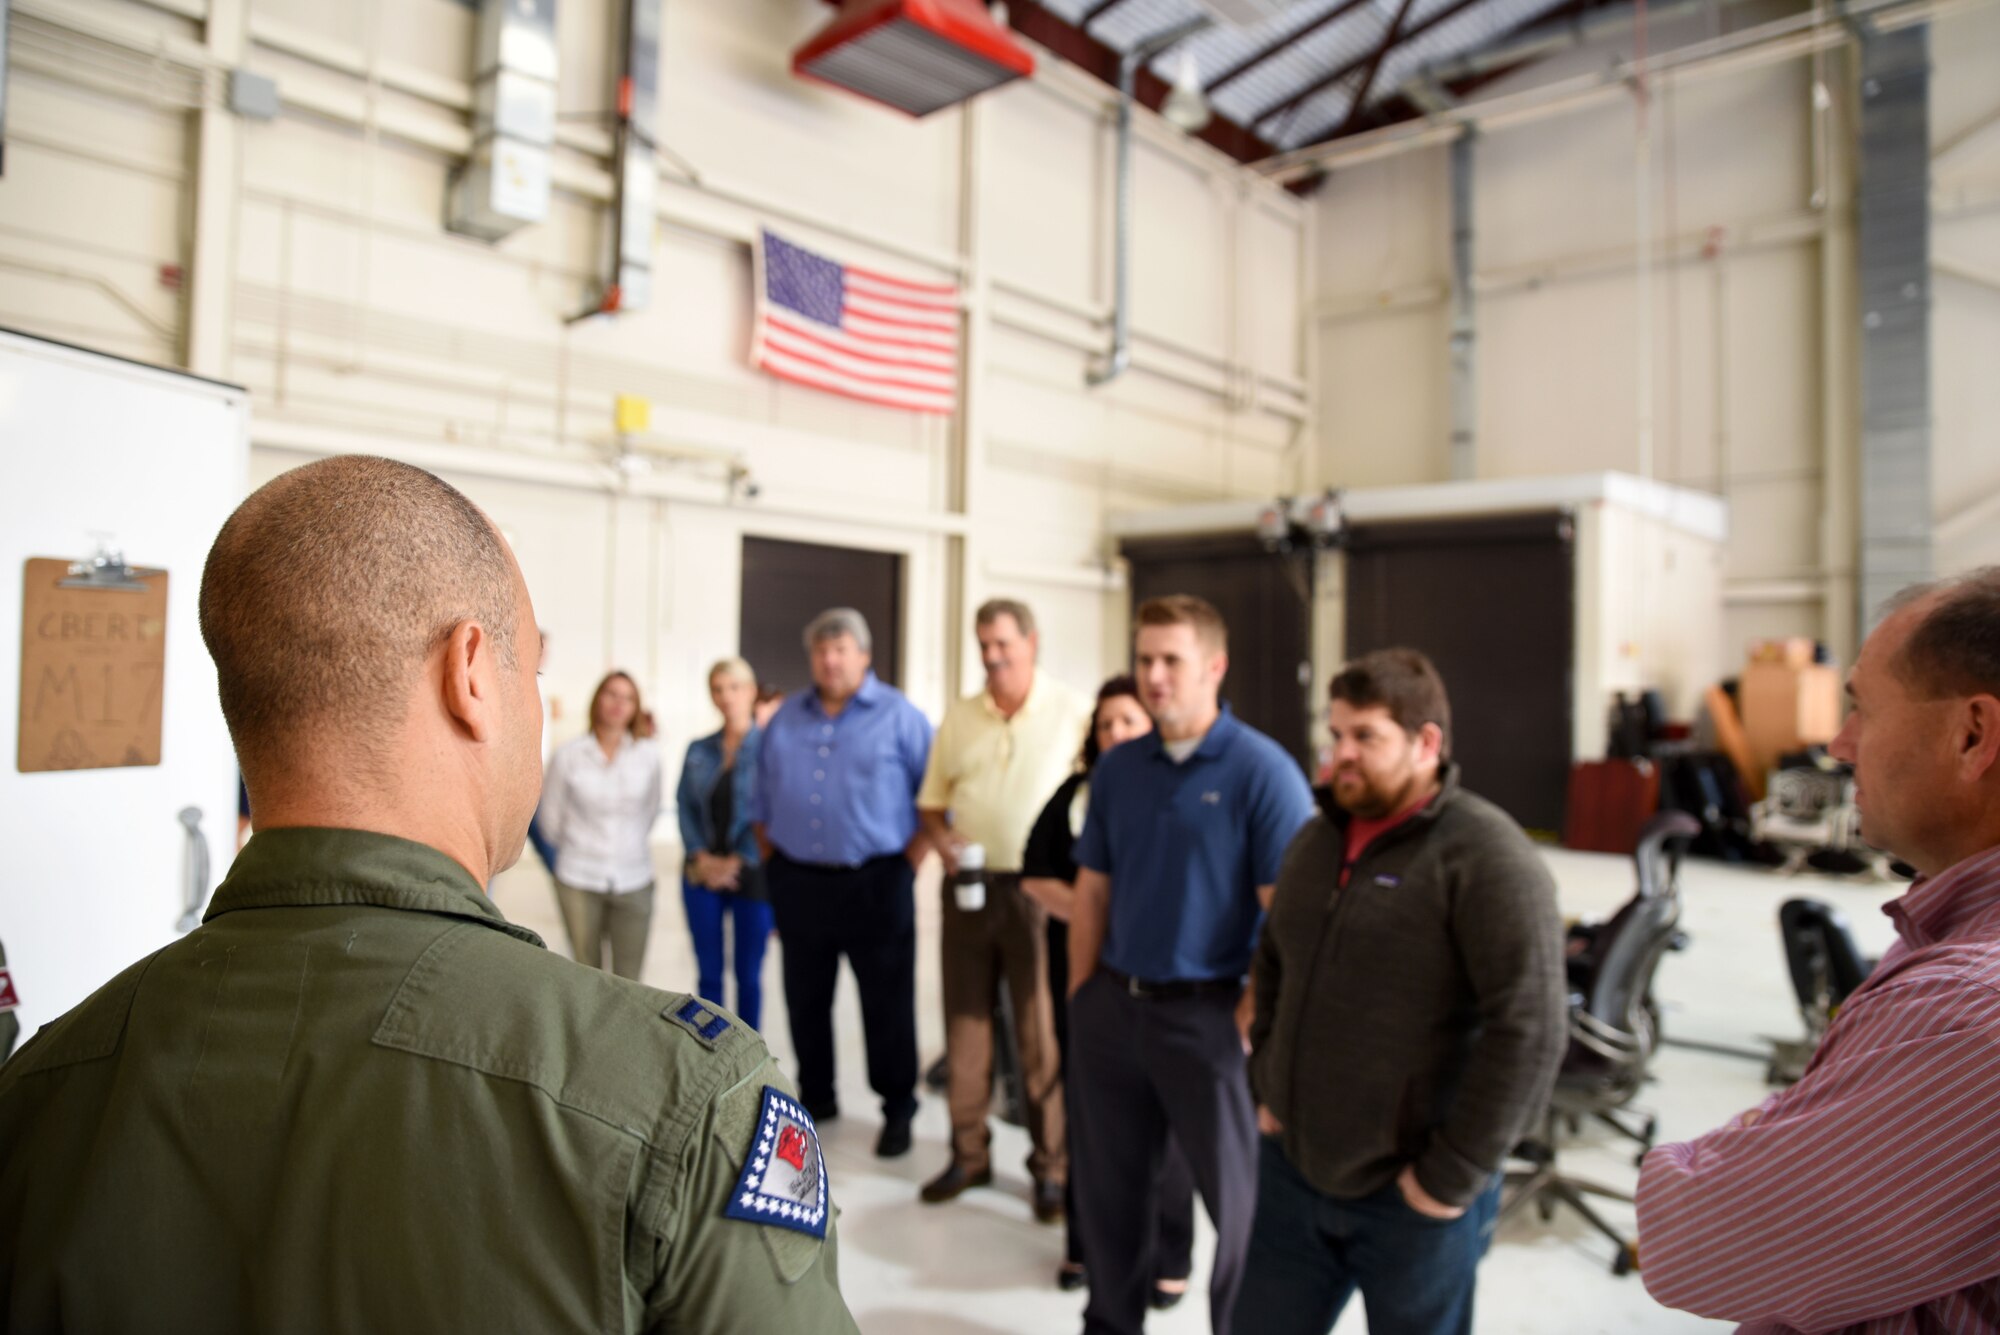 Members of Business by Referral group take part in a tour of the 188th Wing Oct. 22, 2015, where they participated in the predator reaper integrated mission environment (PRIME) simulator and were briefed on the capabilities of the remote air, zonal operations, reach back-processing, assessment and dissemination (RAZORBack PAD) at Ebbing Air National Guard Base, Fort Smith, Ark. The PRIME is a flight simulator that gives remotely piloted aircraft operators the opportunity to hone their skills during simulated missions. The RAZORBack PAD can assist disaster workers on the ground with video from overhead aircraft to provide information on areas or people most in need during emergency response planning and operations. (U.S. Air National Guard photo by Senior Airman Cody Martin/Released)